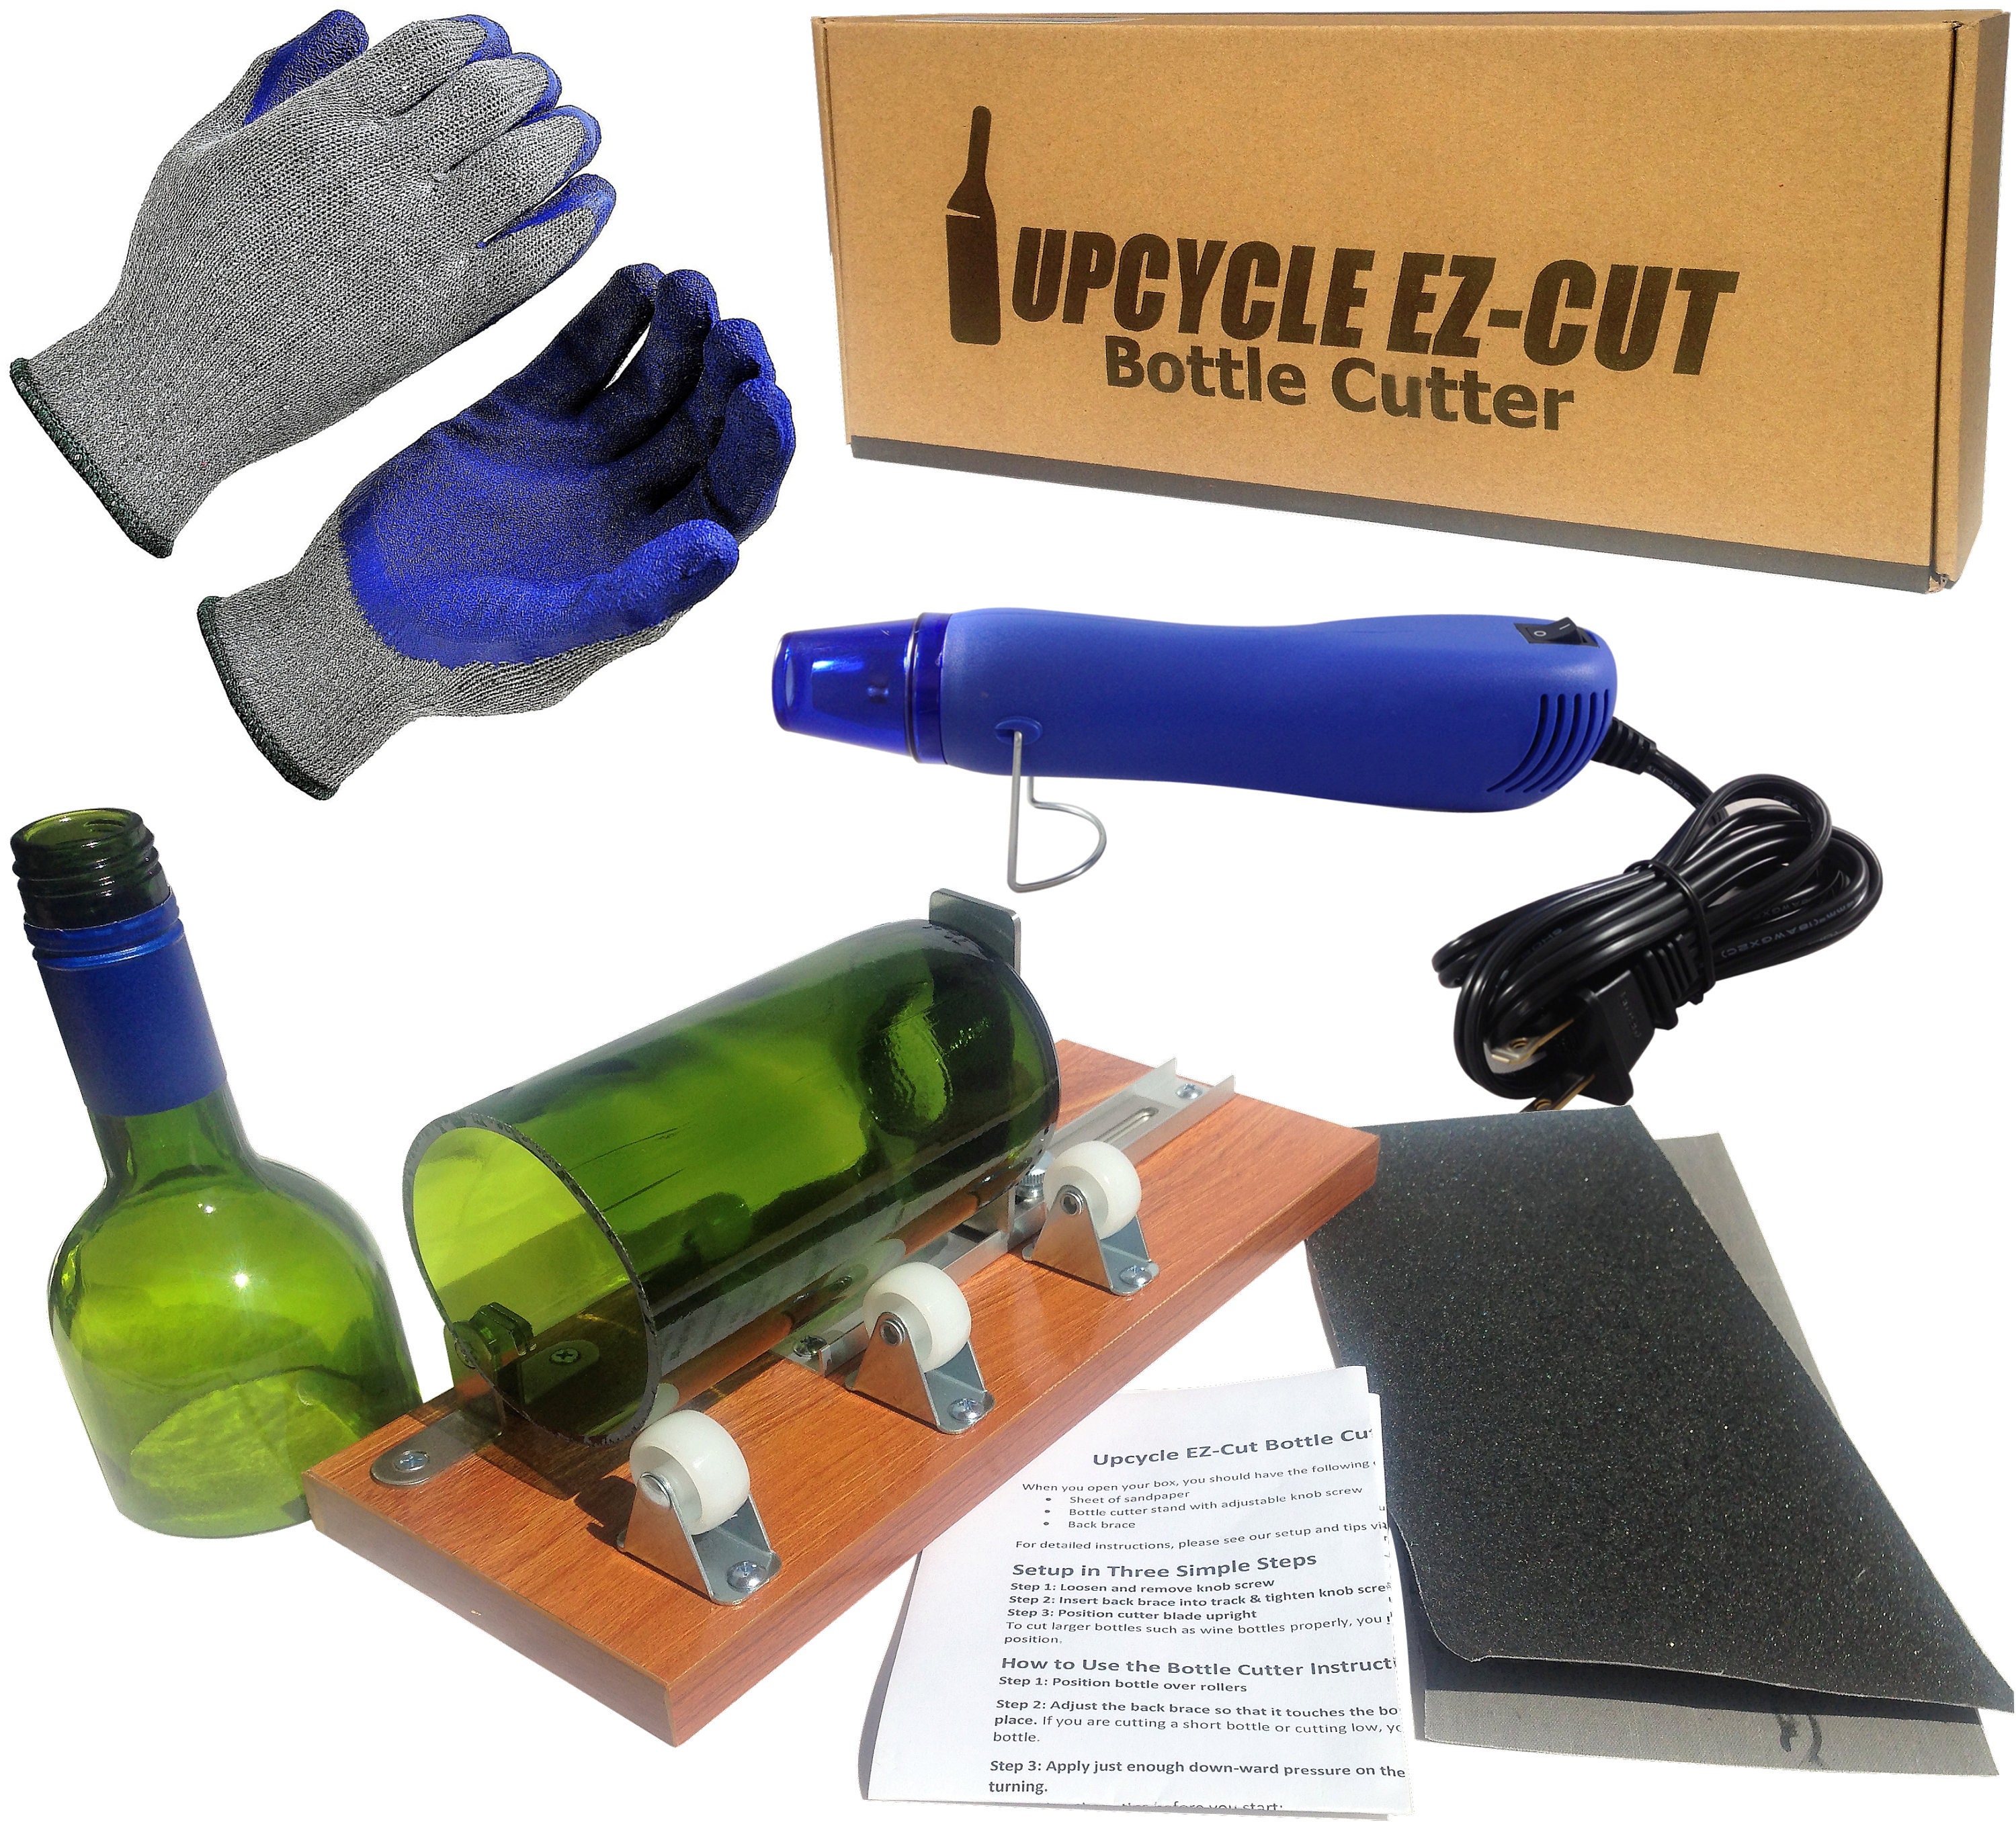 Glass Bottle Cutter, Upcycle Ez-cut, Wine & Beer Bottle Cutting Machine  Tool: Ultimate Kit Heat Breaking Tool Gloves Sandpaper 